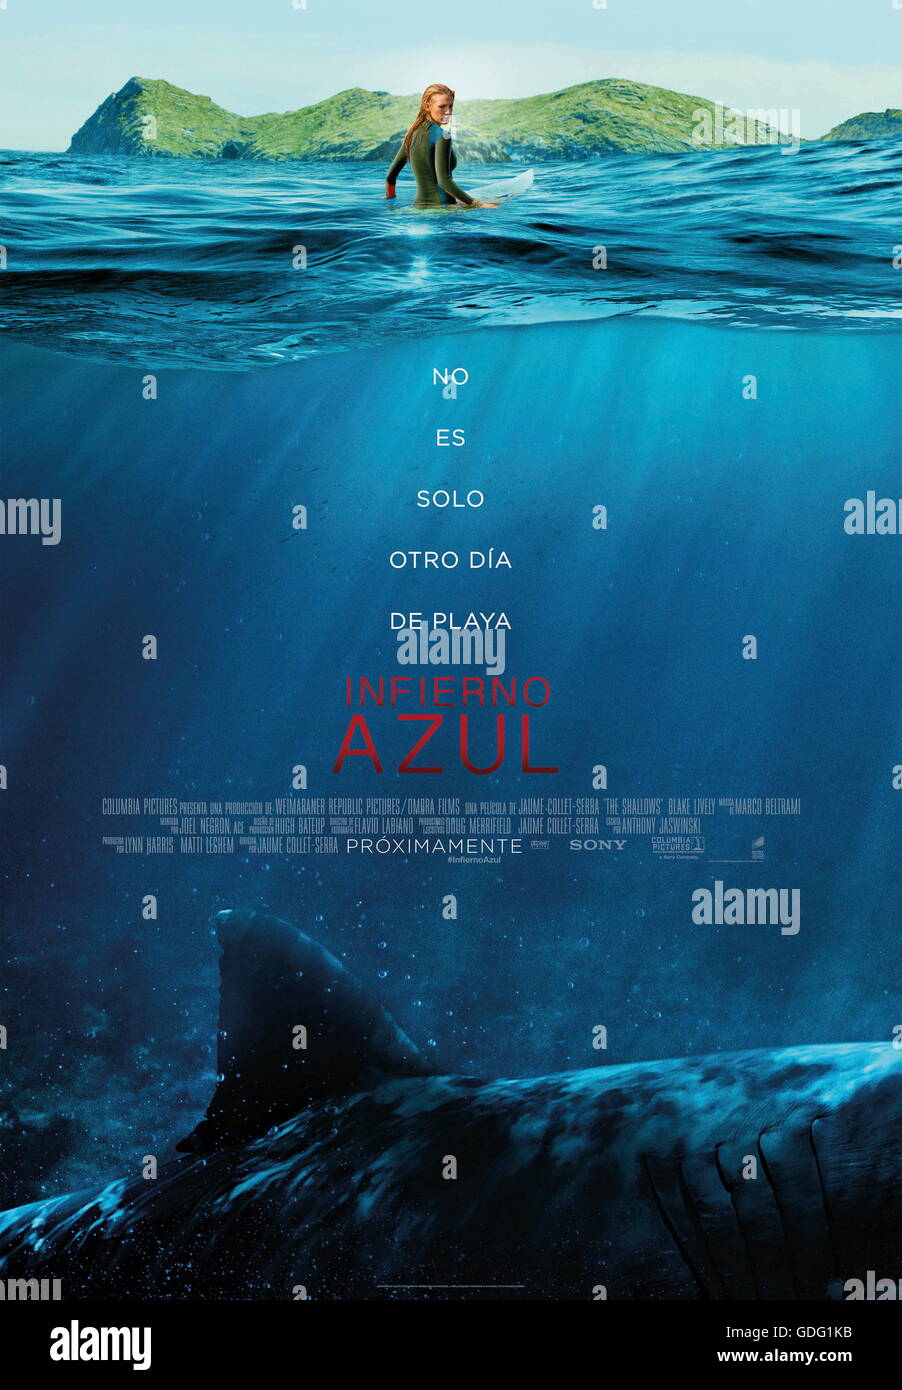 RELEASE DATE: June 29, 2016 TITLE: The Shallows STUDIO: Columbia Pictures DIRECTOR: Jaume Collet-Serra PLOT: When Nancy (Blake Lively) is attacked by a great white shark while surfing alone, she is stranded just a short distance from shore. Though she is only 200 yards from her survival, getting there proves the ultimate contest of wills PICTURED: Blake Lively as Nancy (Credit: c Columbia Pictures/Entertainment Pictures/) Stock Photo